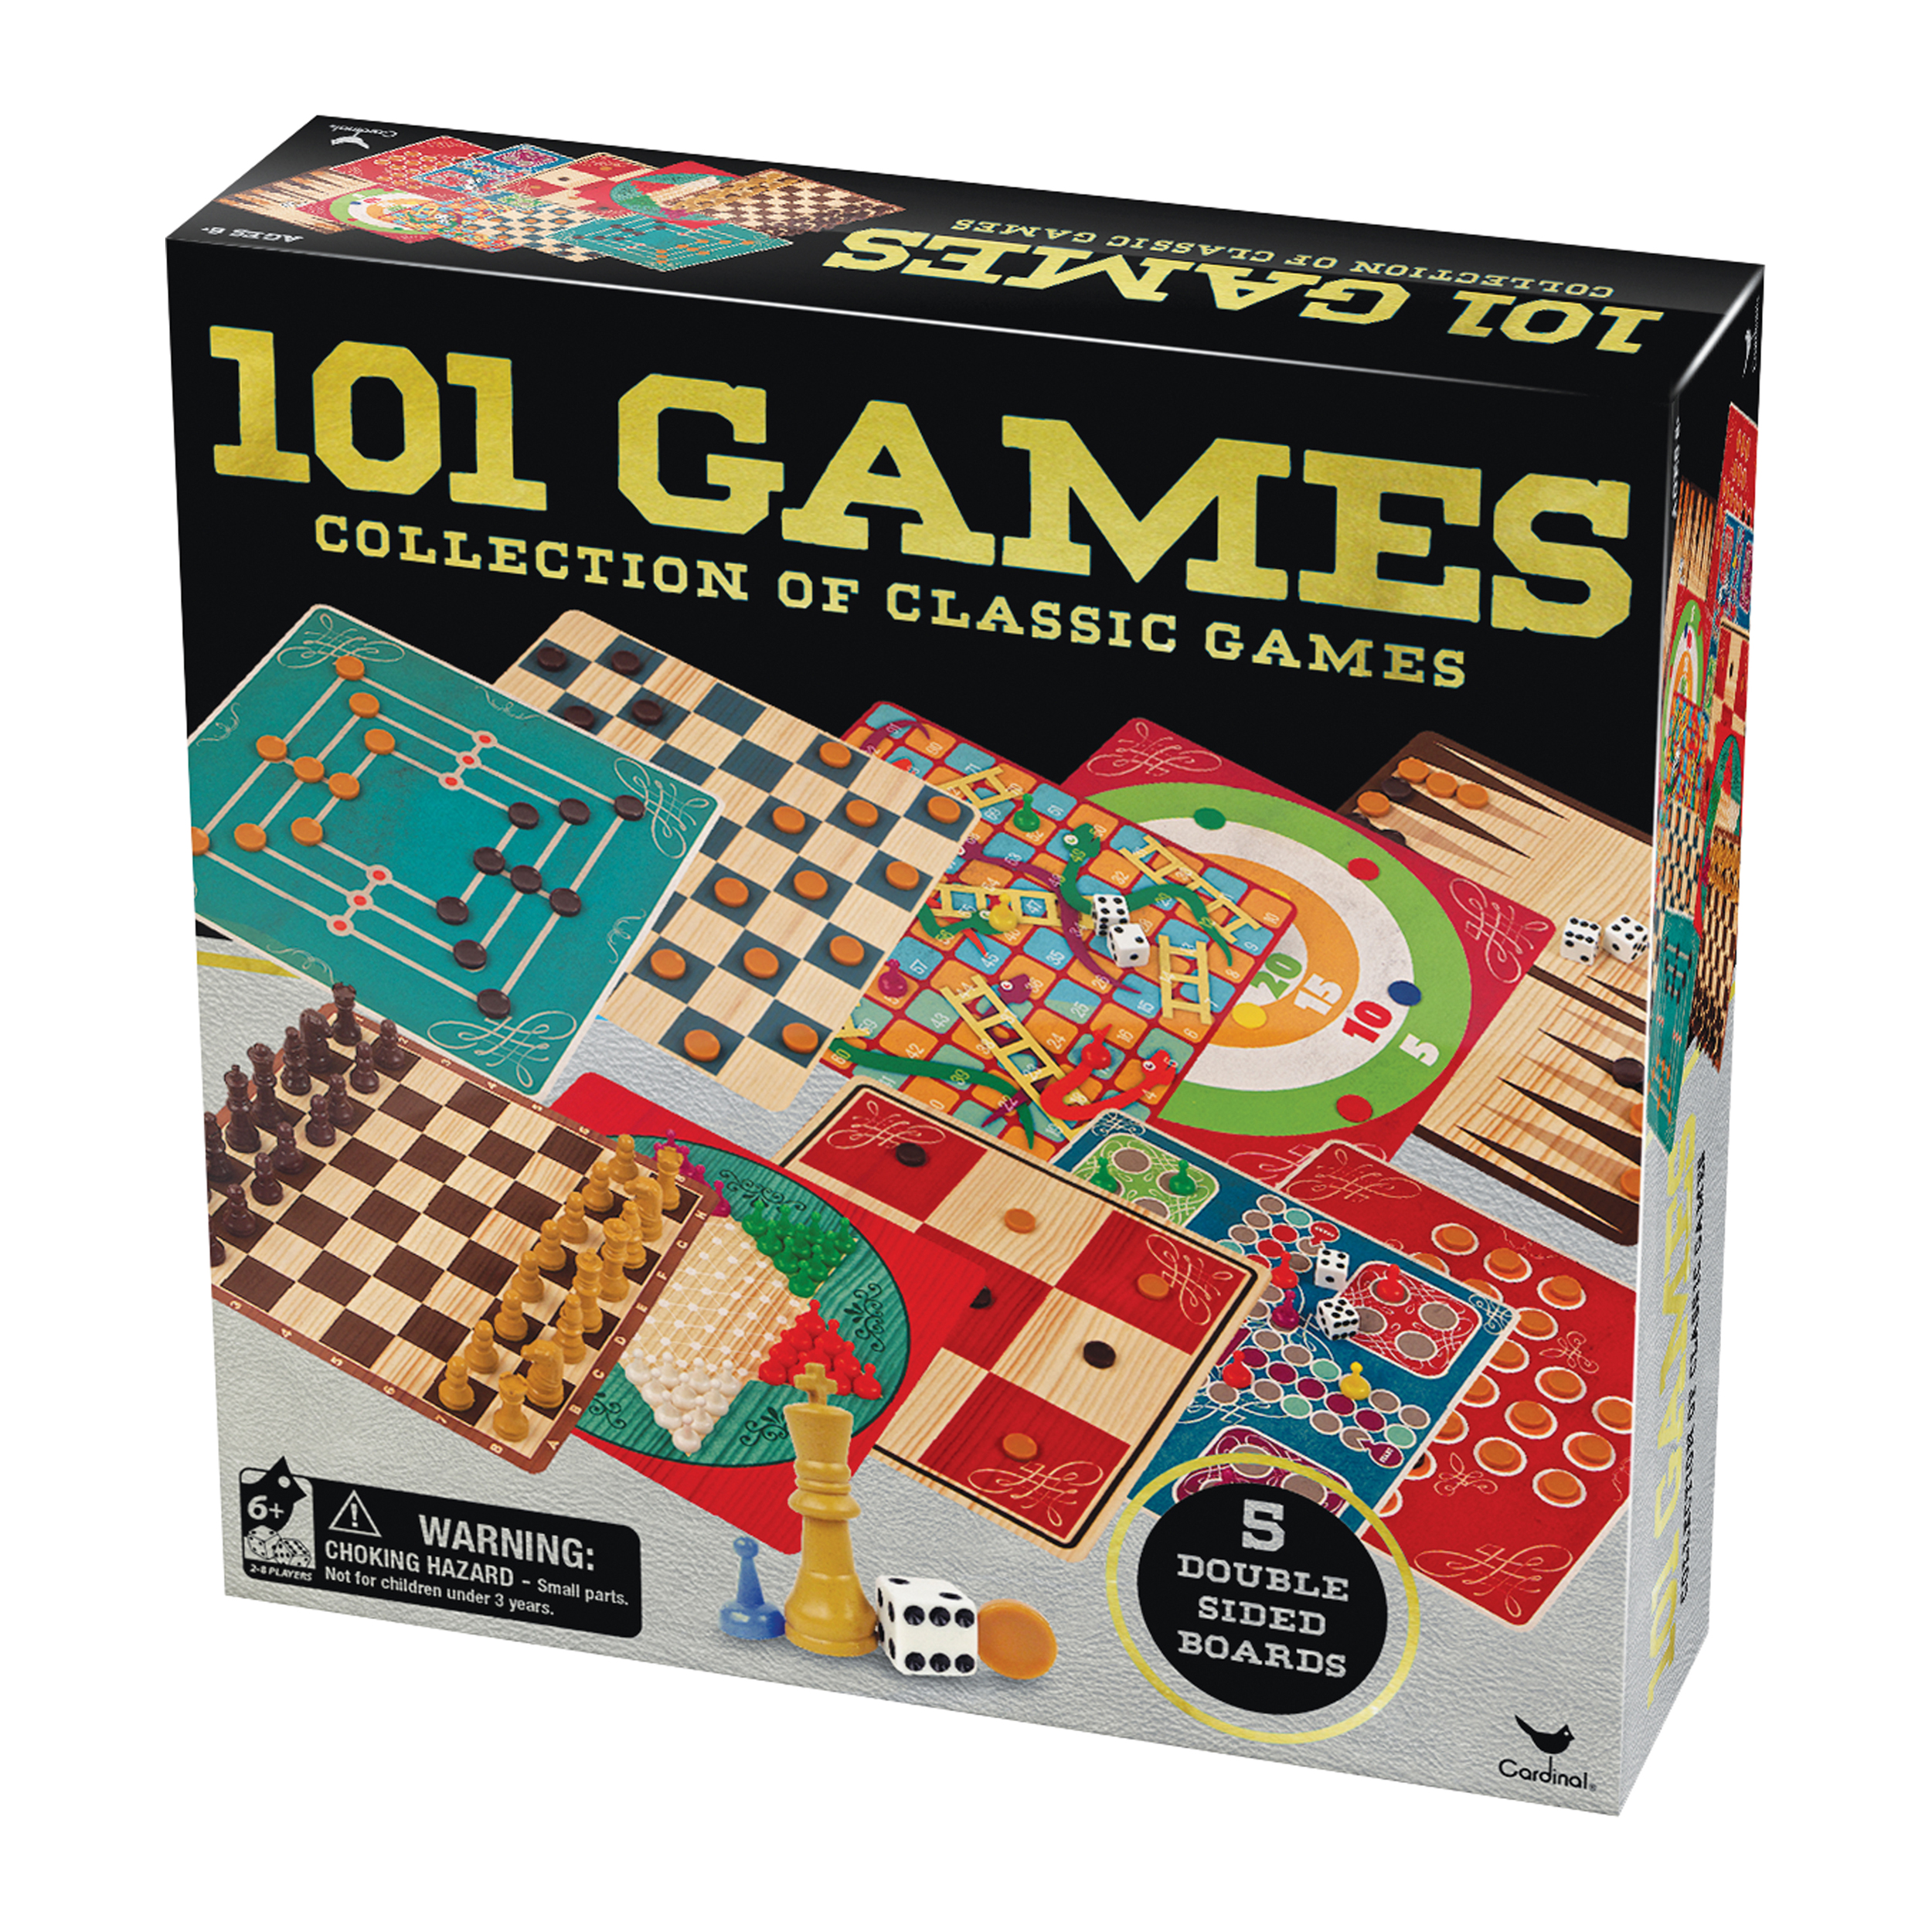 Cardinal Supplies 101 Games - Collection of Classic Games